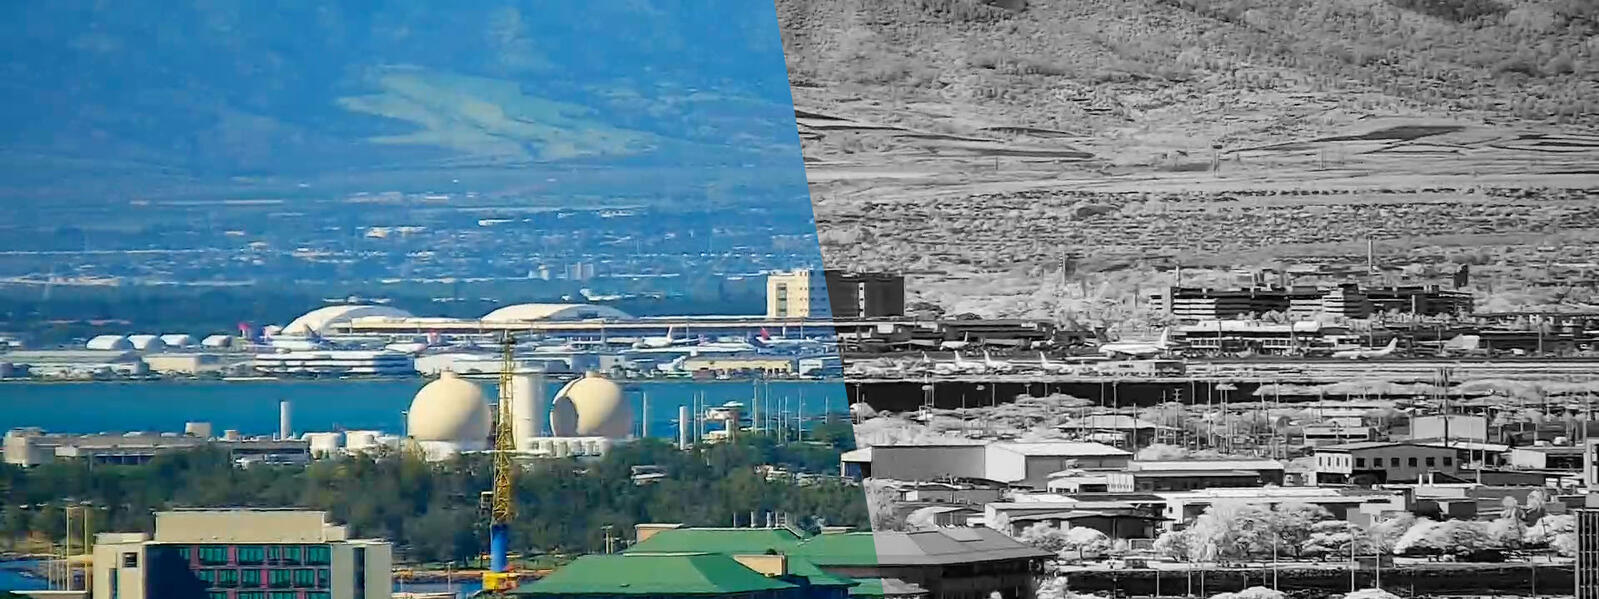 An image showing visible imaging on the left and NIR imaging on the right, cutting through the haze in the scene.